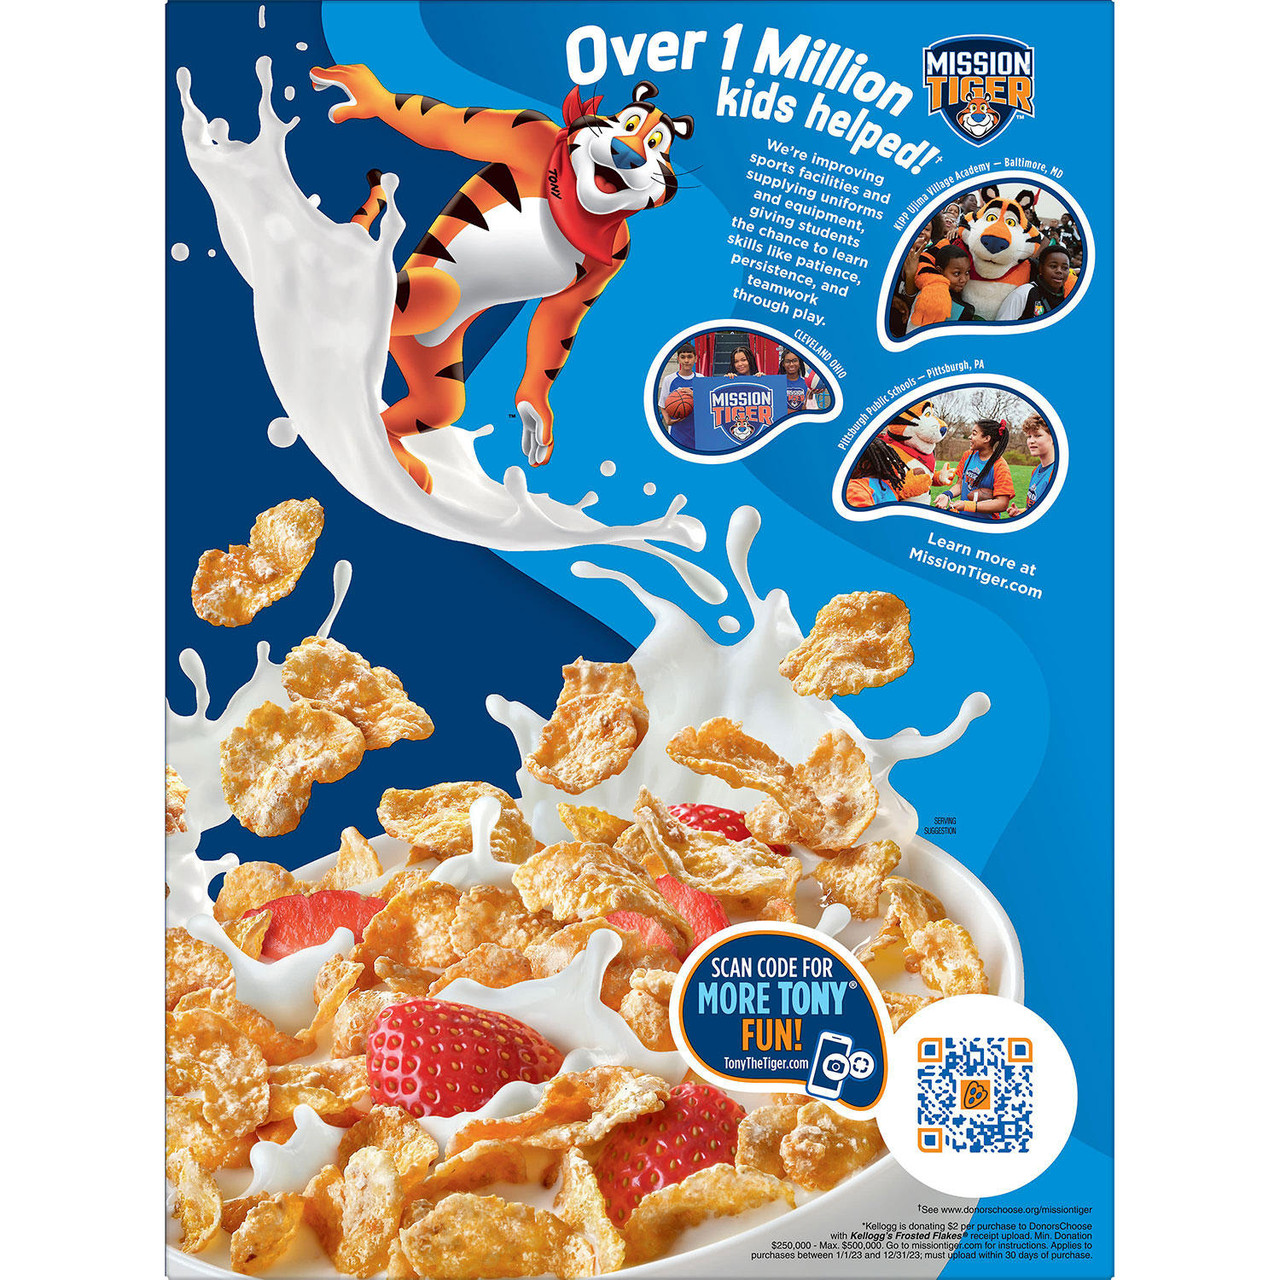 Kellogg's Frosted Flakes Cereal (55 oz.) - [From 44.00 - Choose pk Qty ] - *Ships from Miami